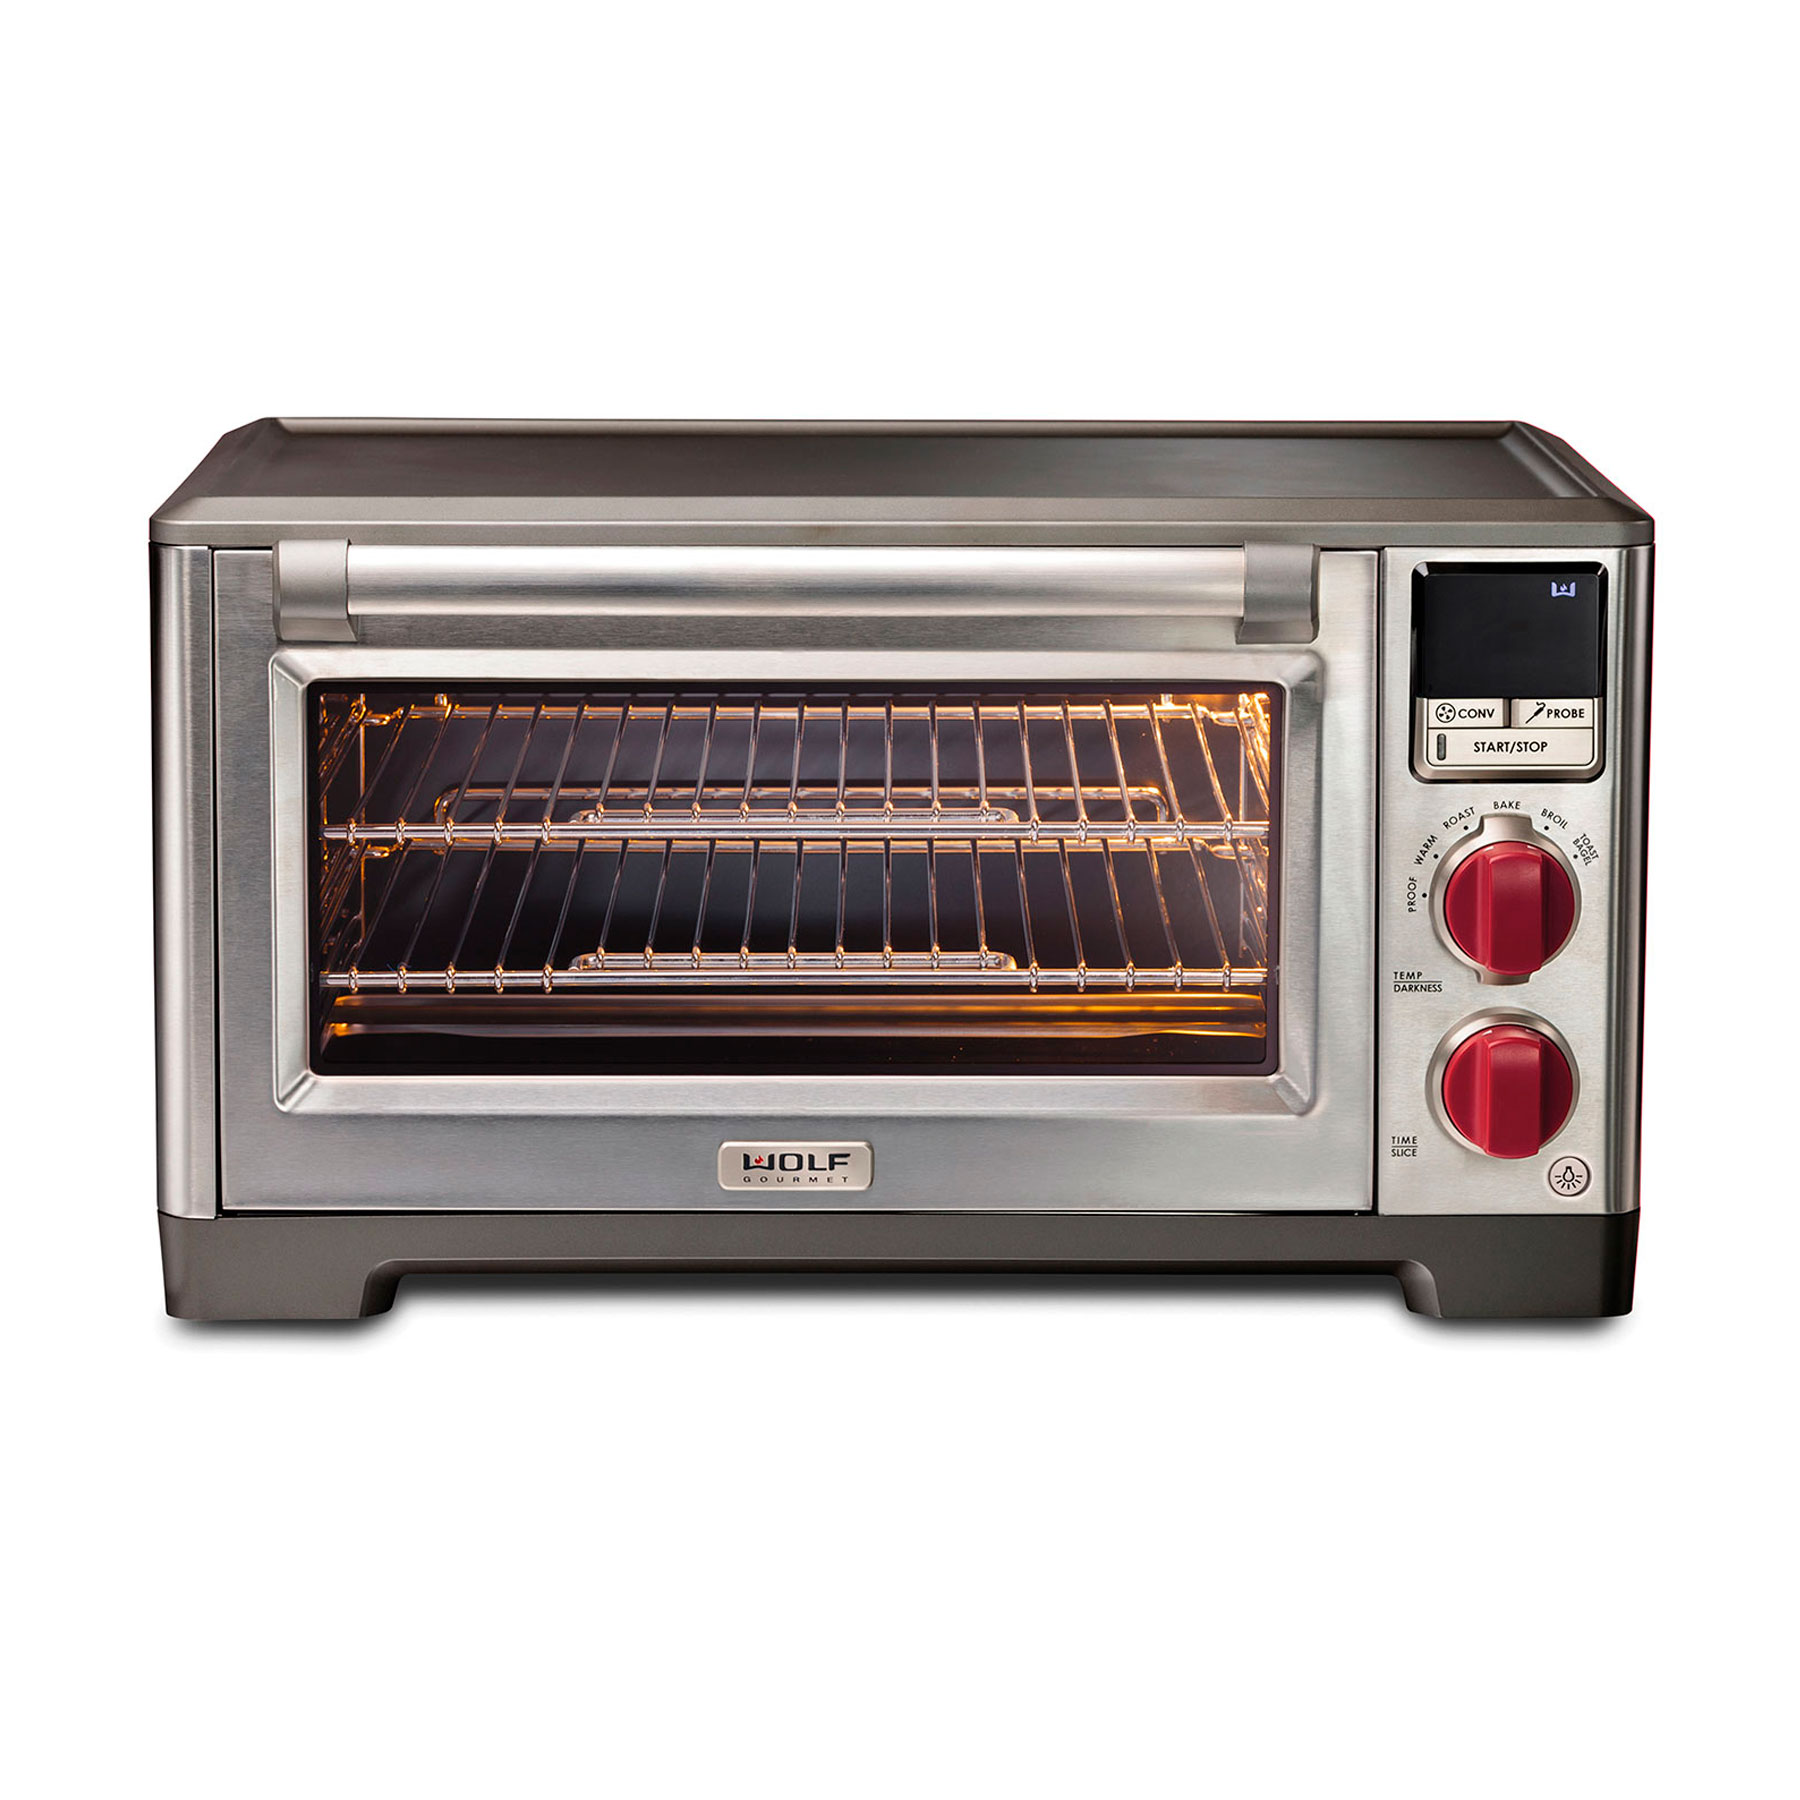 https://wolfgourmet.com/media/home-products/countertop-oven-home-front.jpg